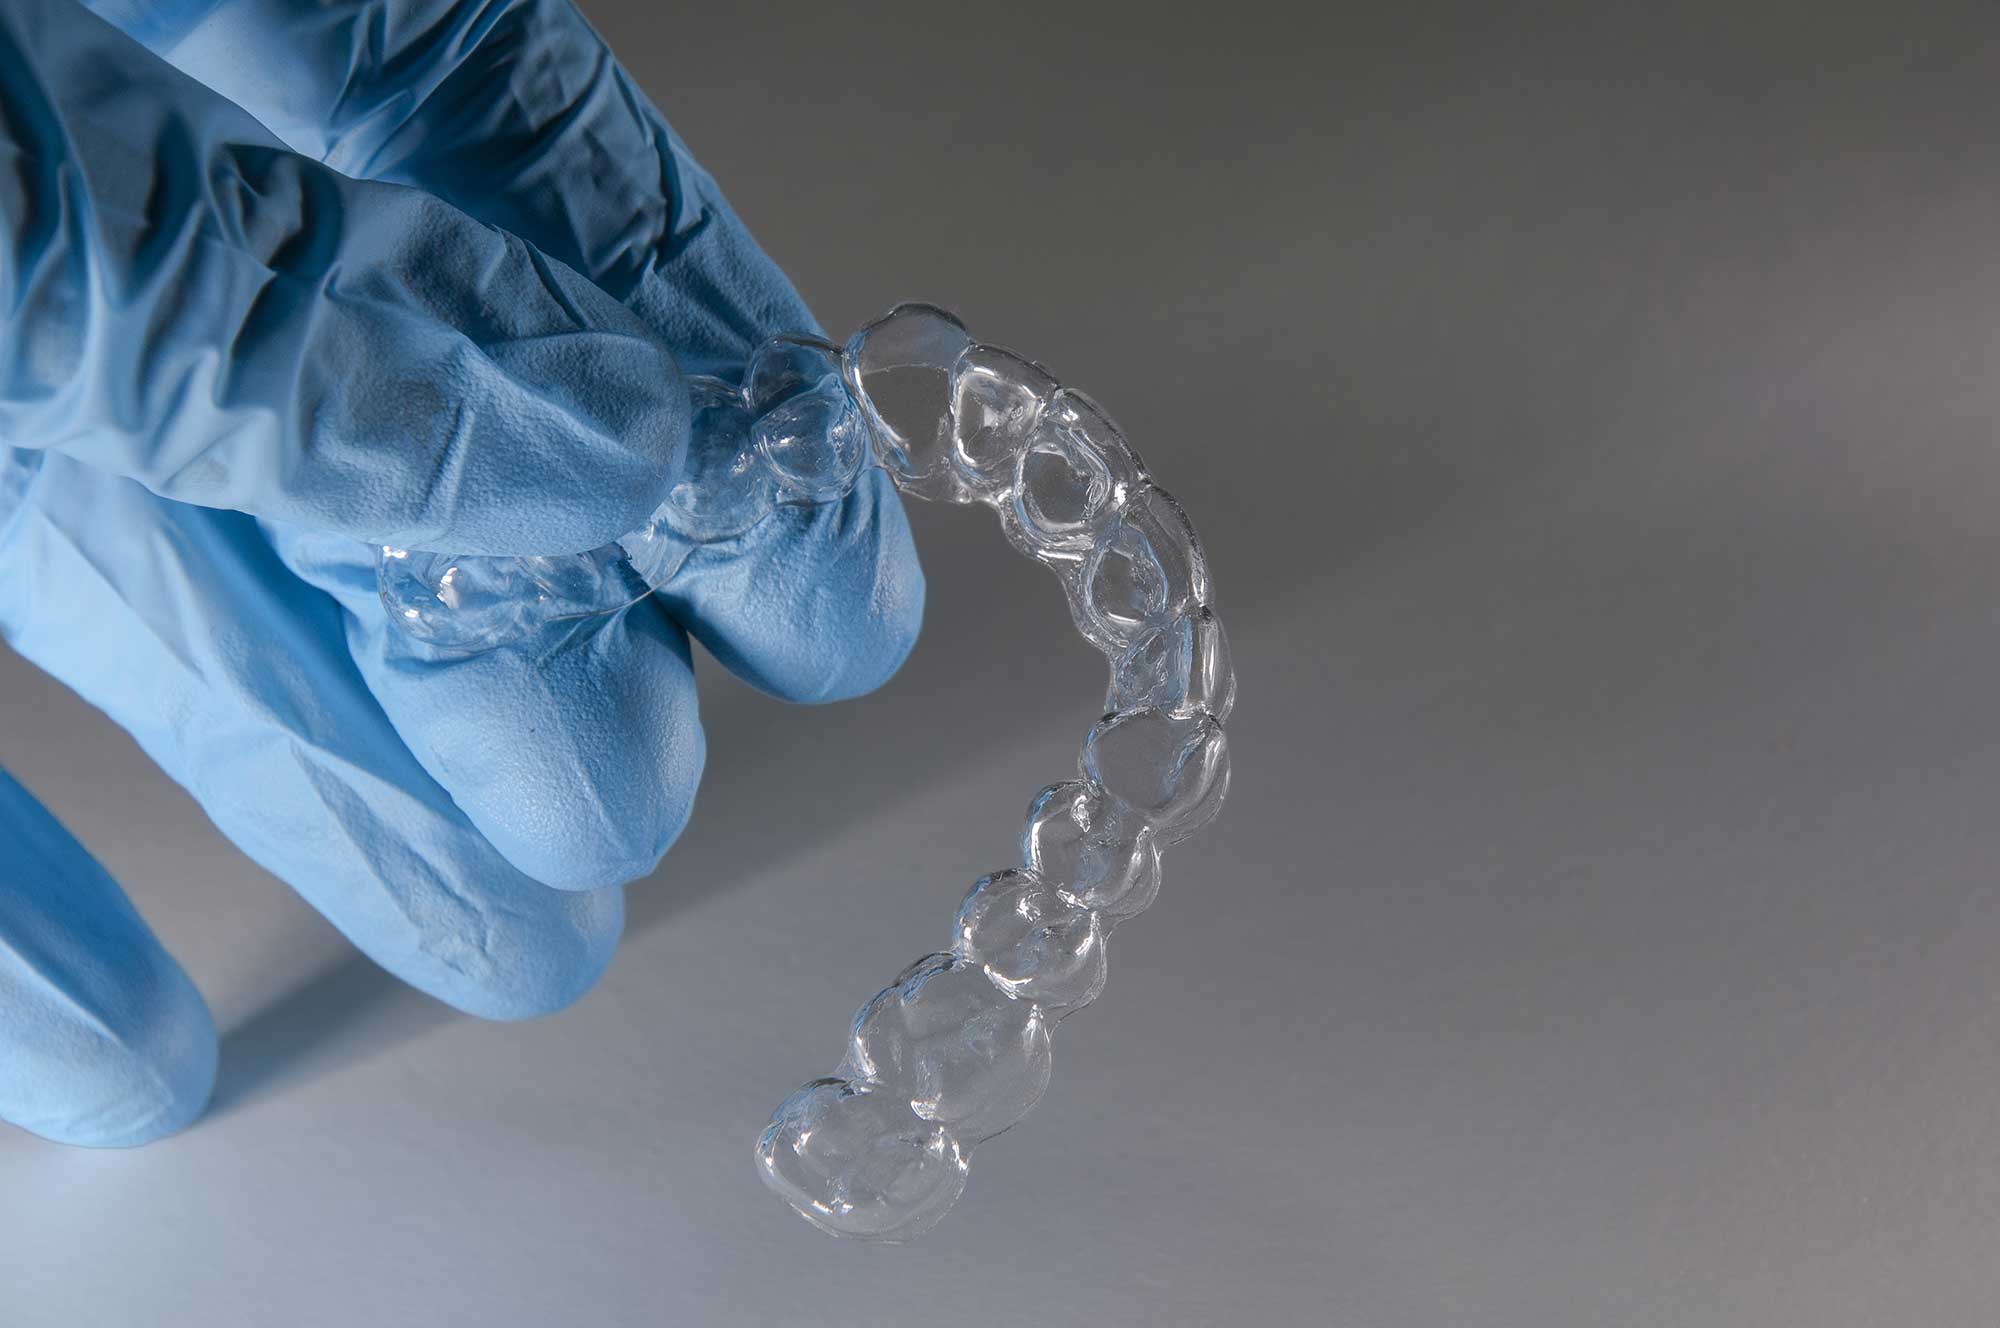 Jan Einfeldt discusses DIY aligners and why more needs to be done to regulate and educate